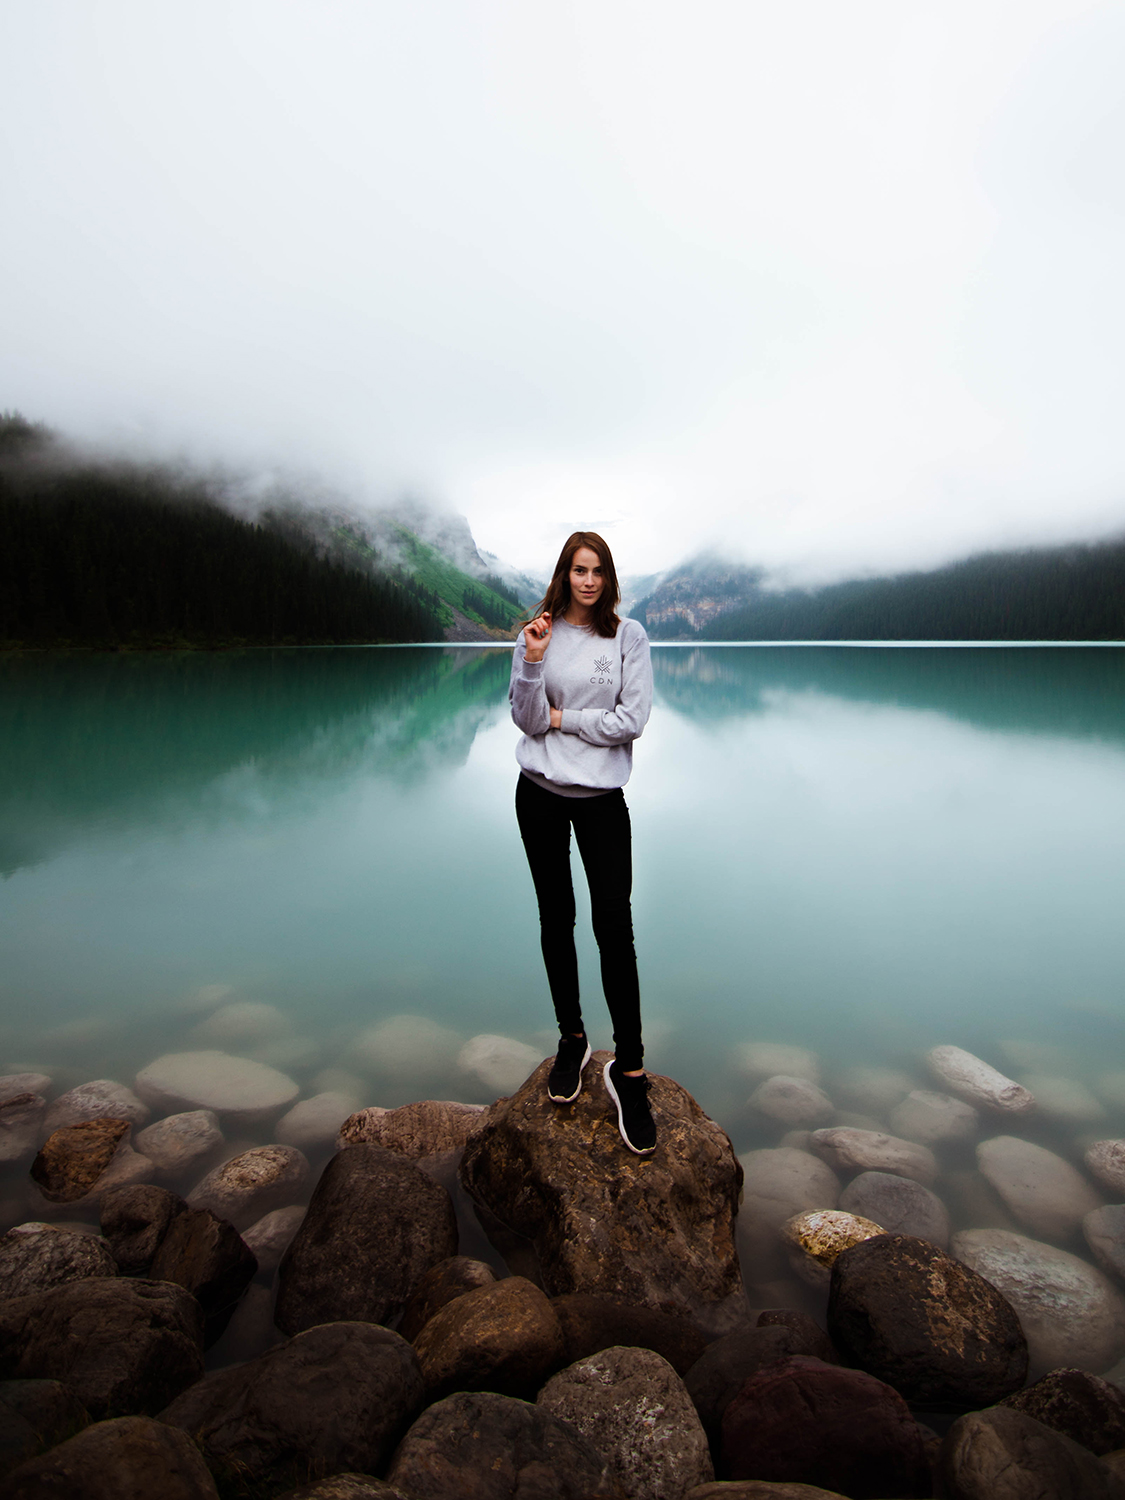 Female subject stands on rock on Lake Louise on cloudy sky day. The water is beautifully clear